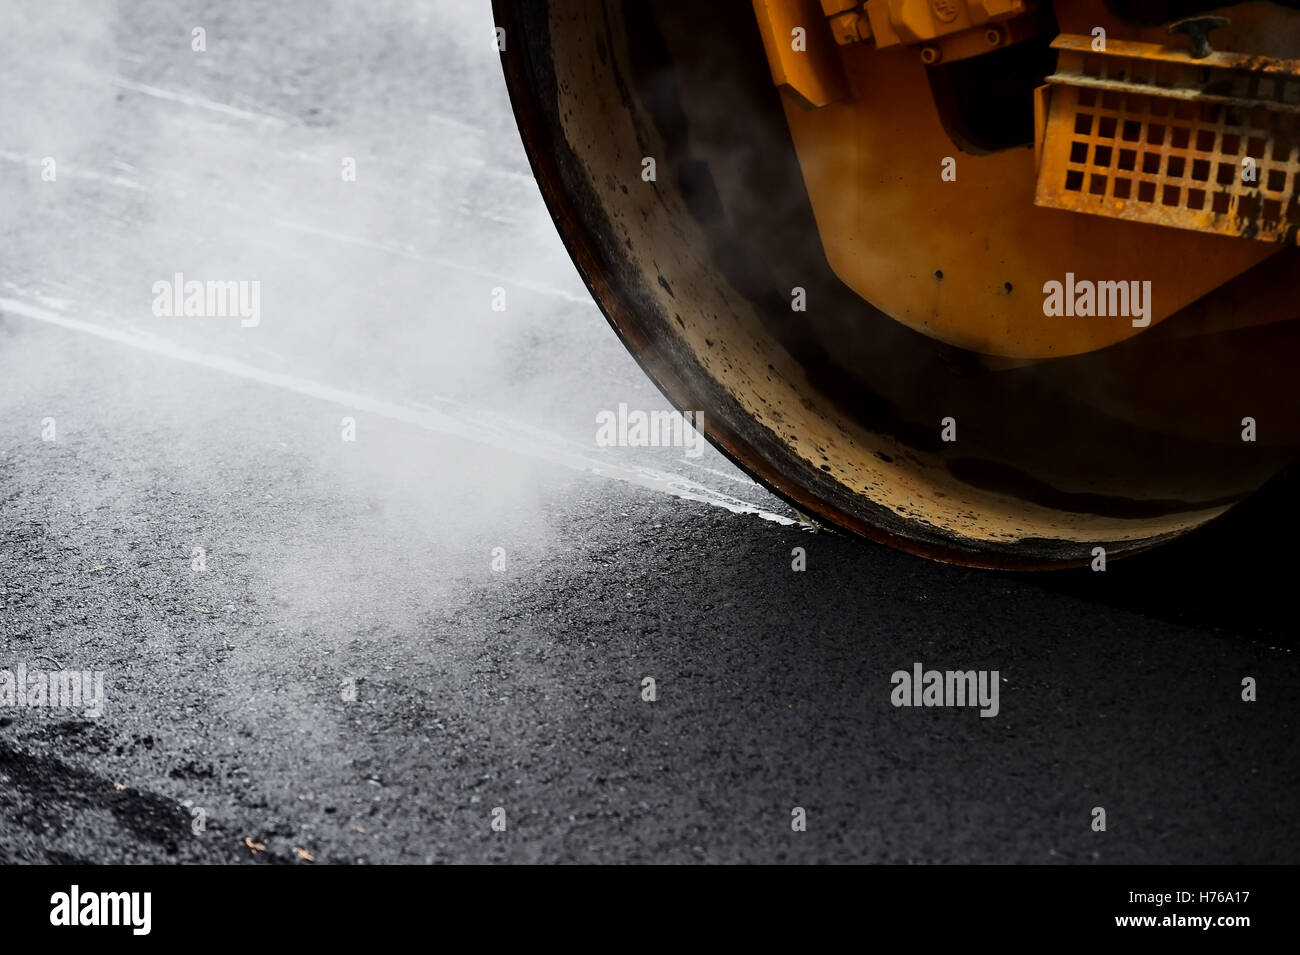 Asphalt paving with a steel wheel roller. Steam coming out from asphalt. Stock Photo